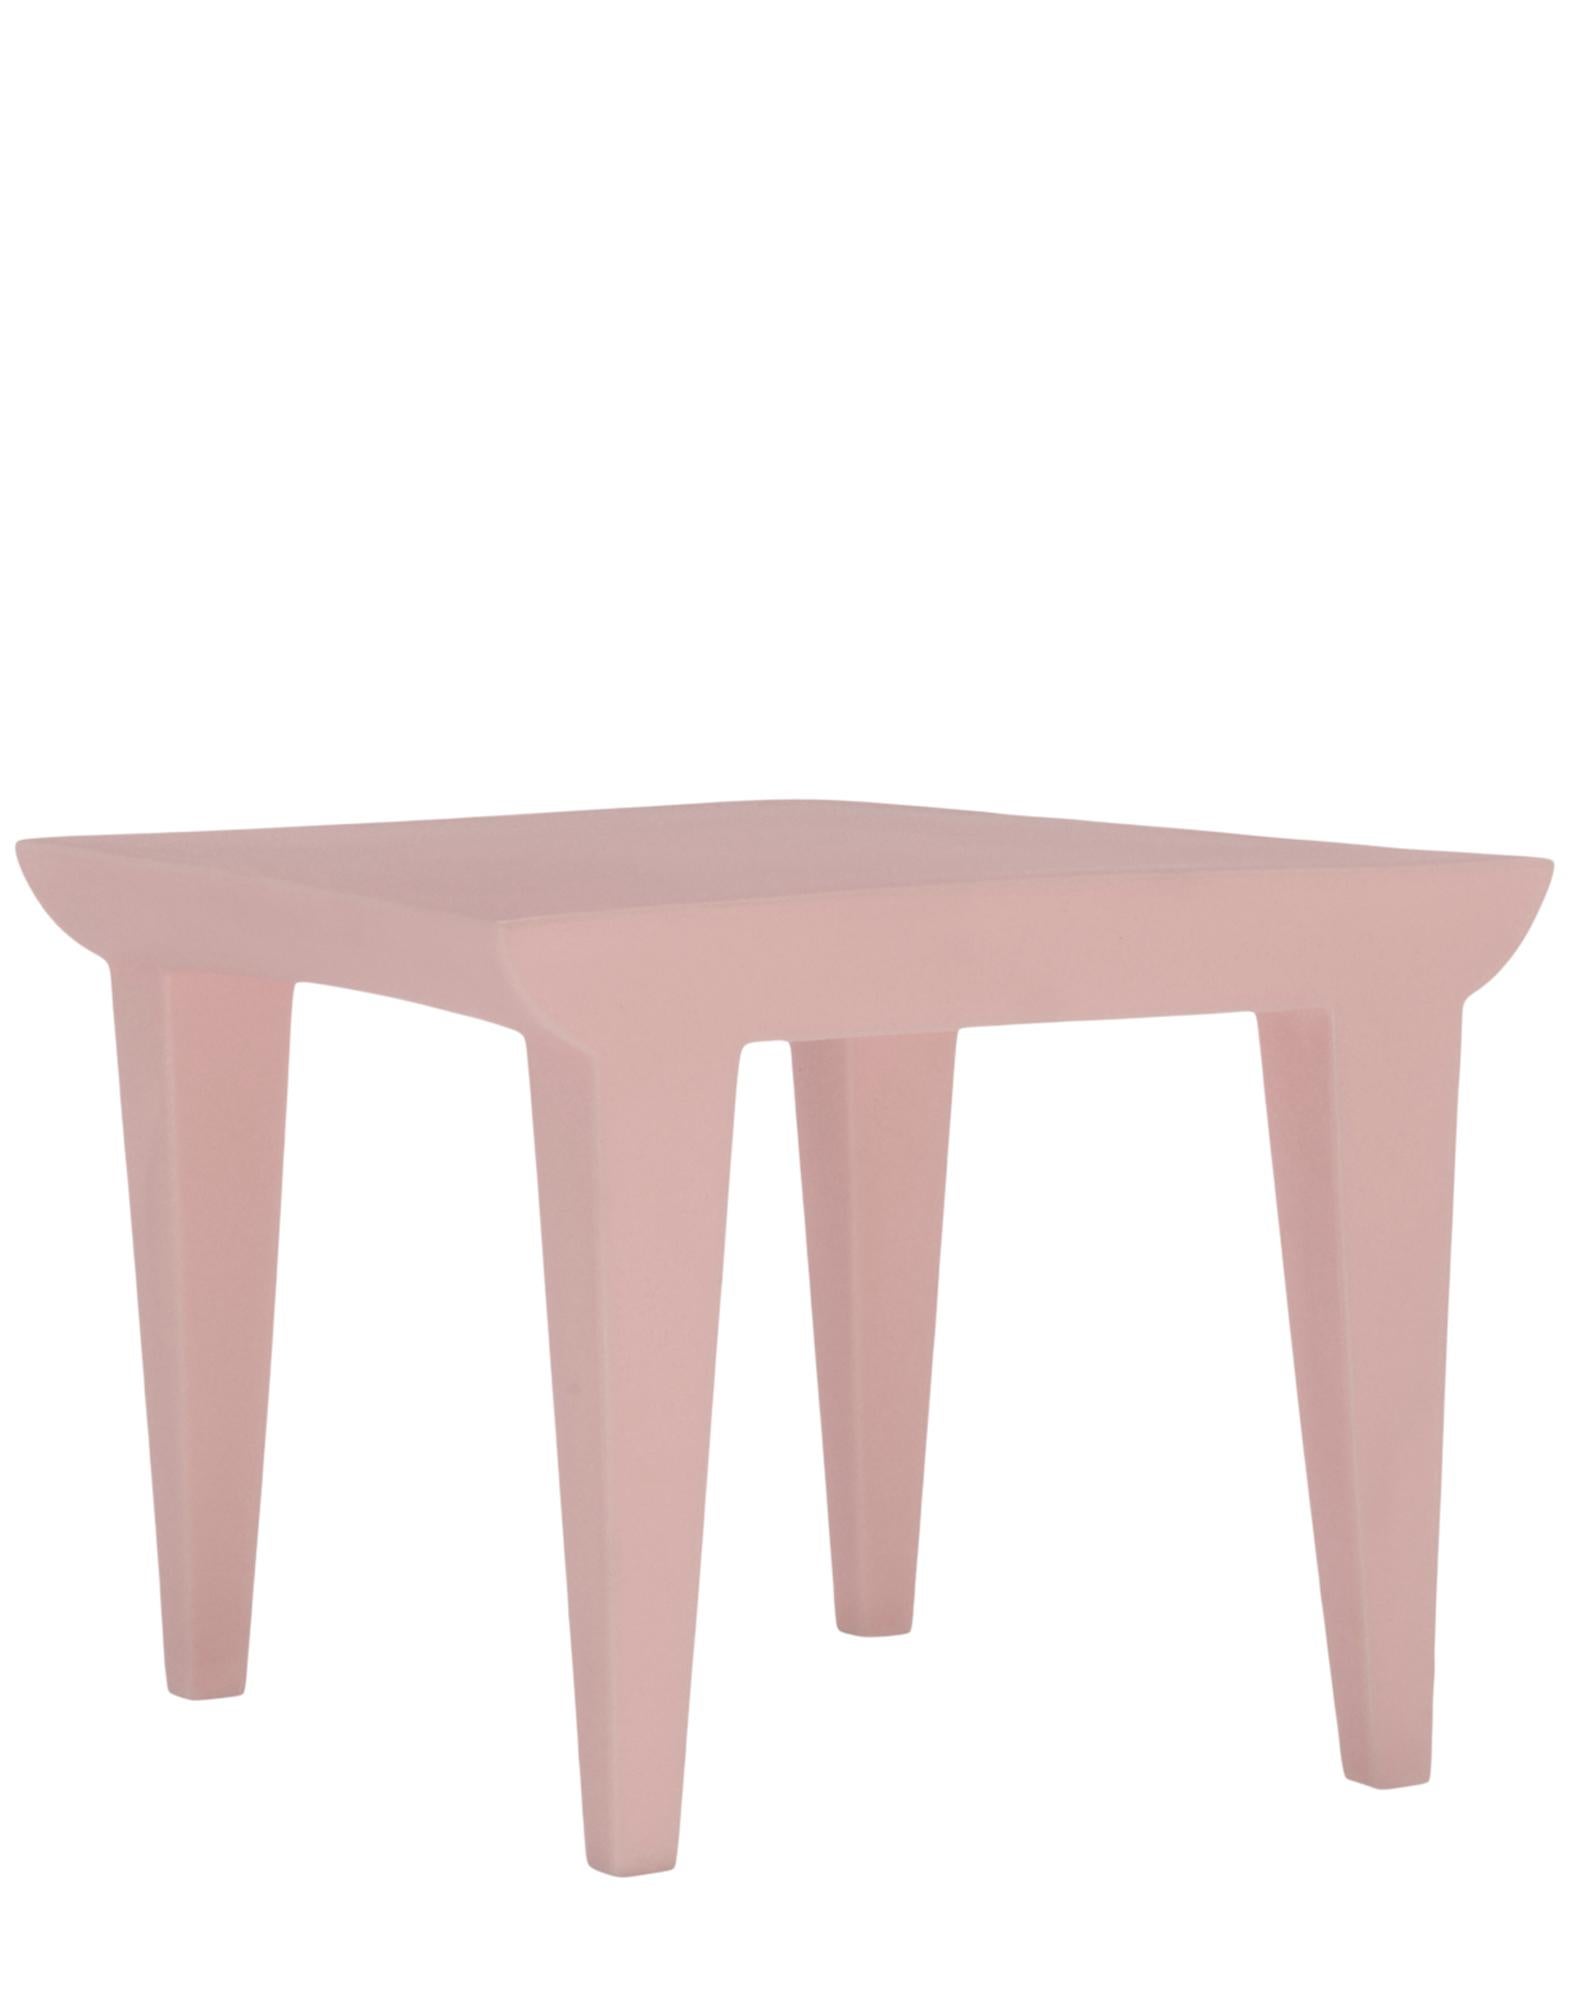 Bubble club side table in powder.

Dimensions: Height 30.75 in, width 23.65 in, depth 29.5 in.; unit weight: 5.5 kg. Made of: Polyethylene. Outdoor use.